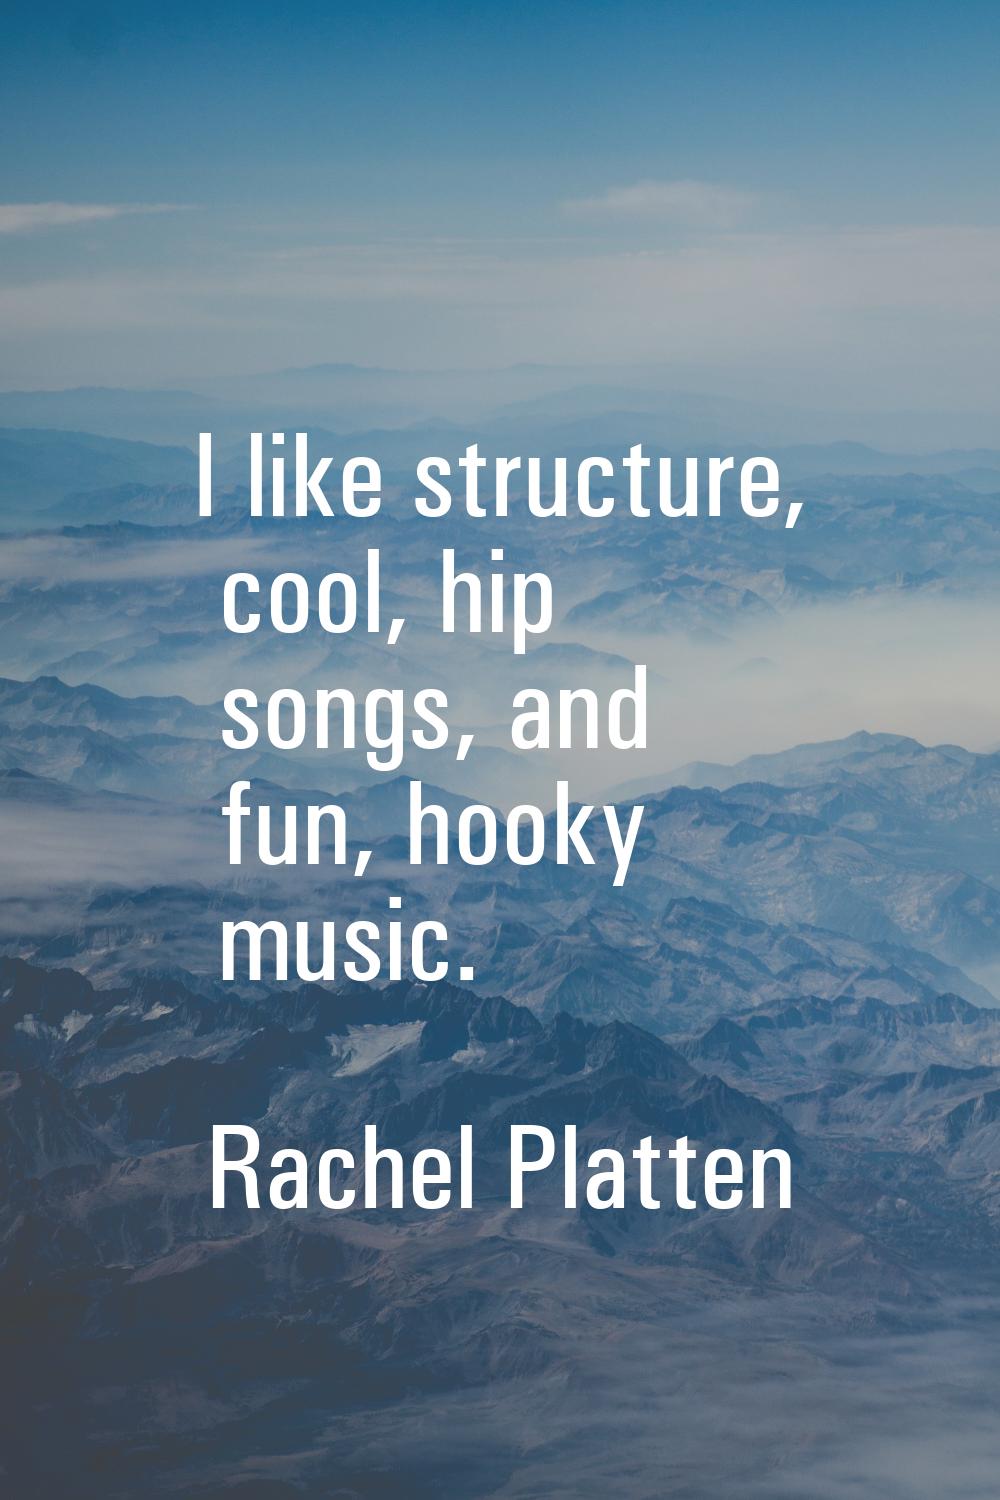 I like structure, cool, hip songs, and fun, hooky music.